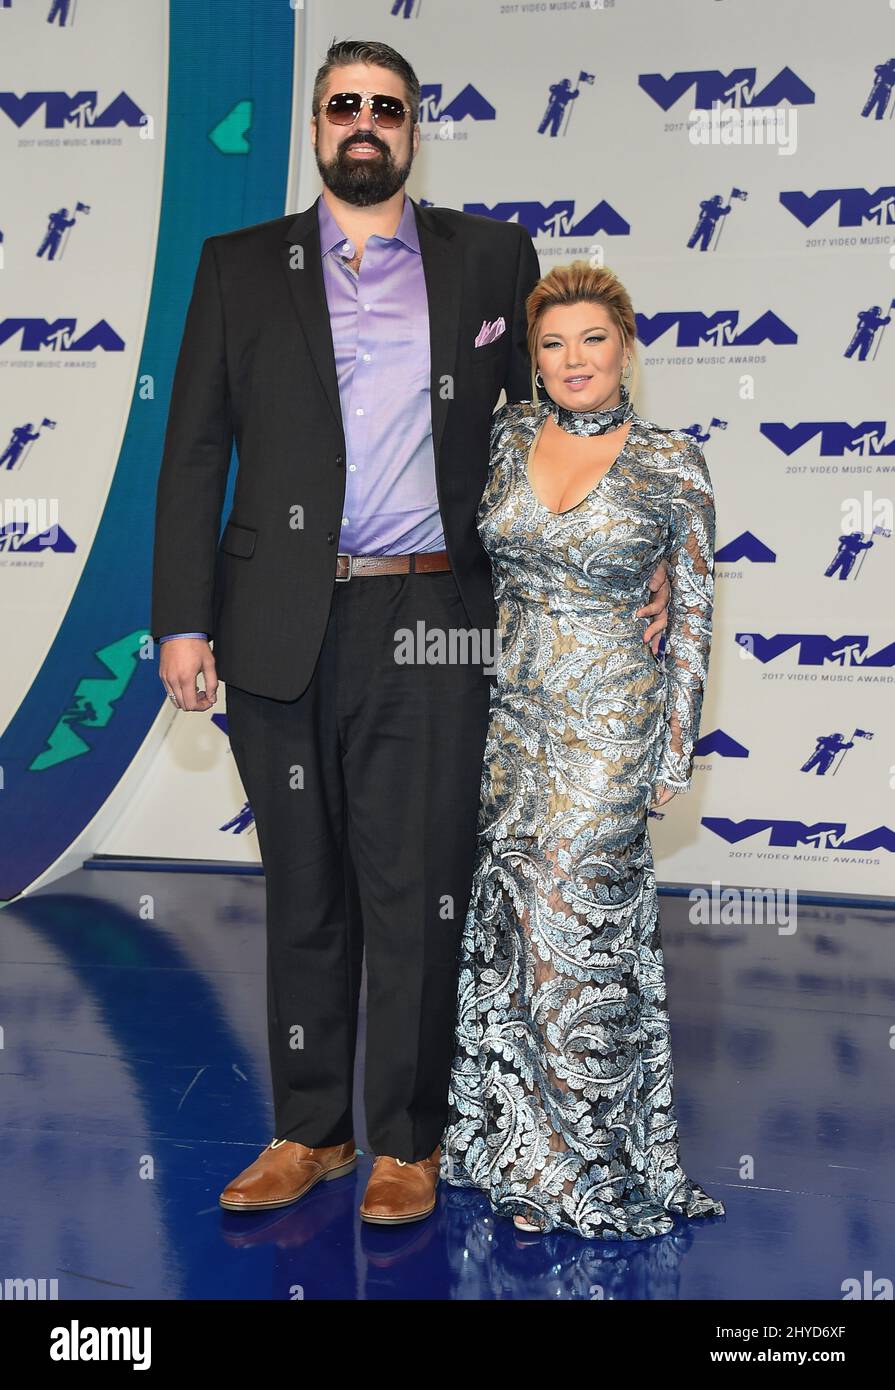 Amber portwood and matt baier hi-res stock photography and images - Alamy